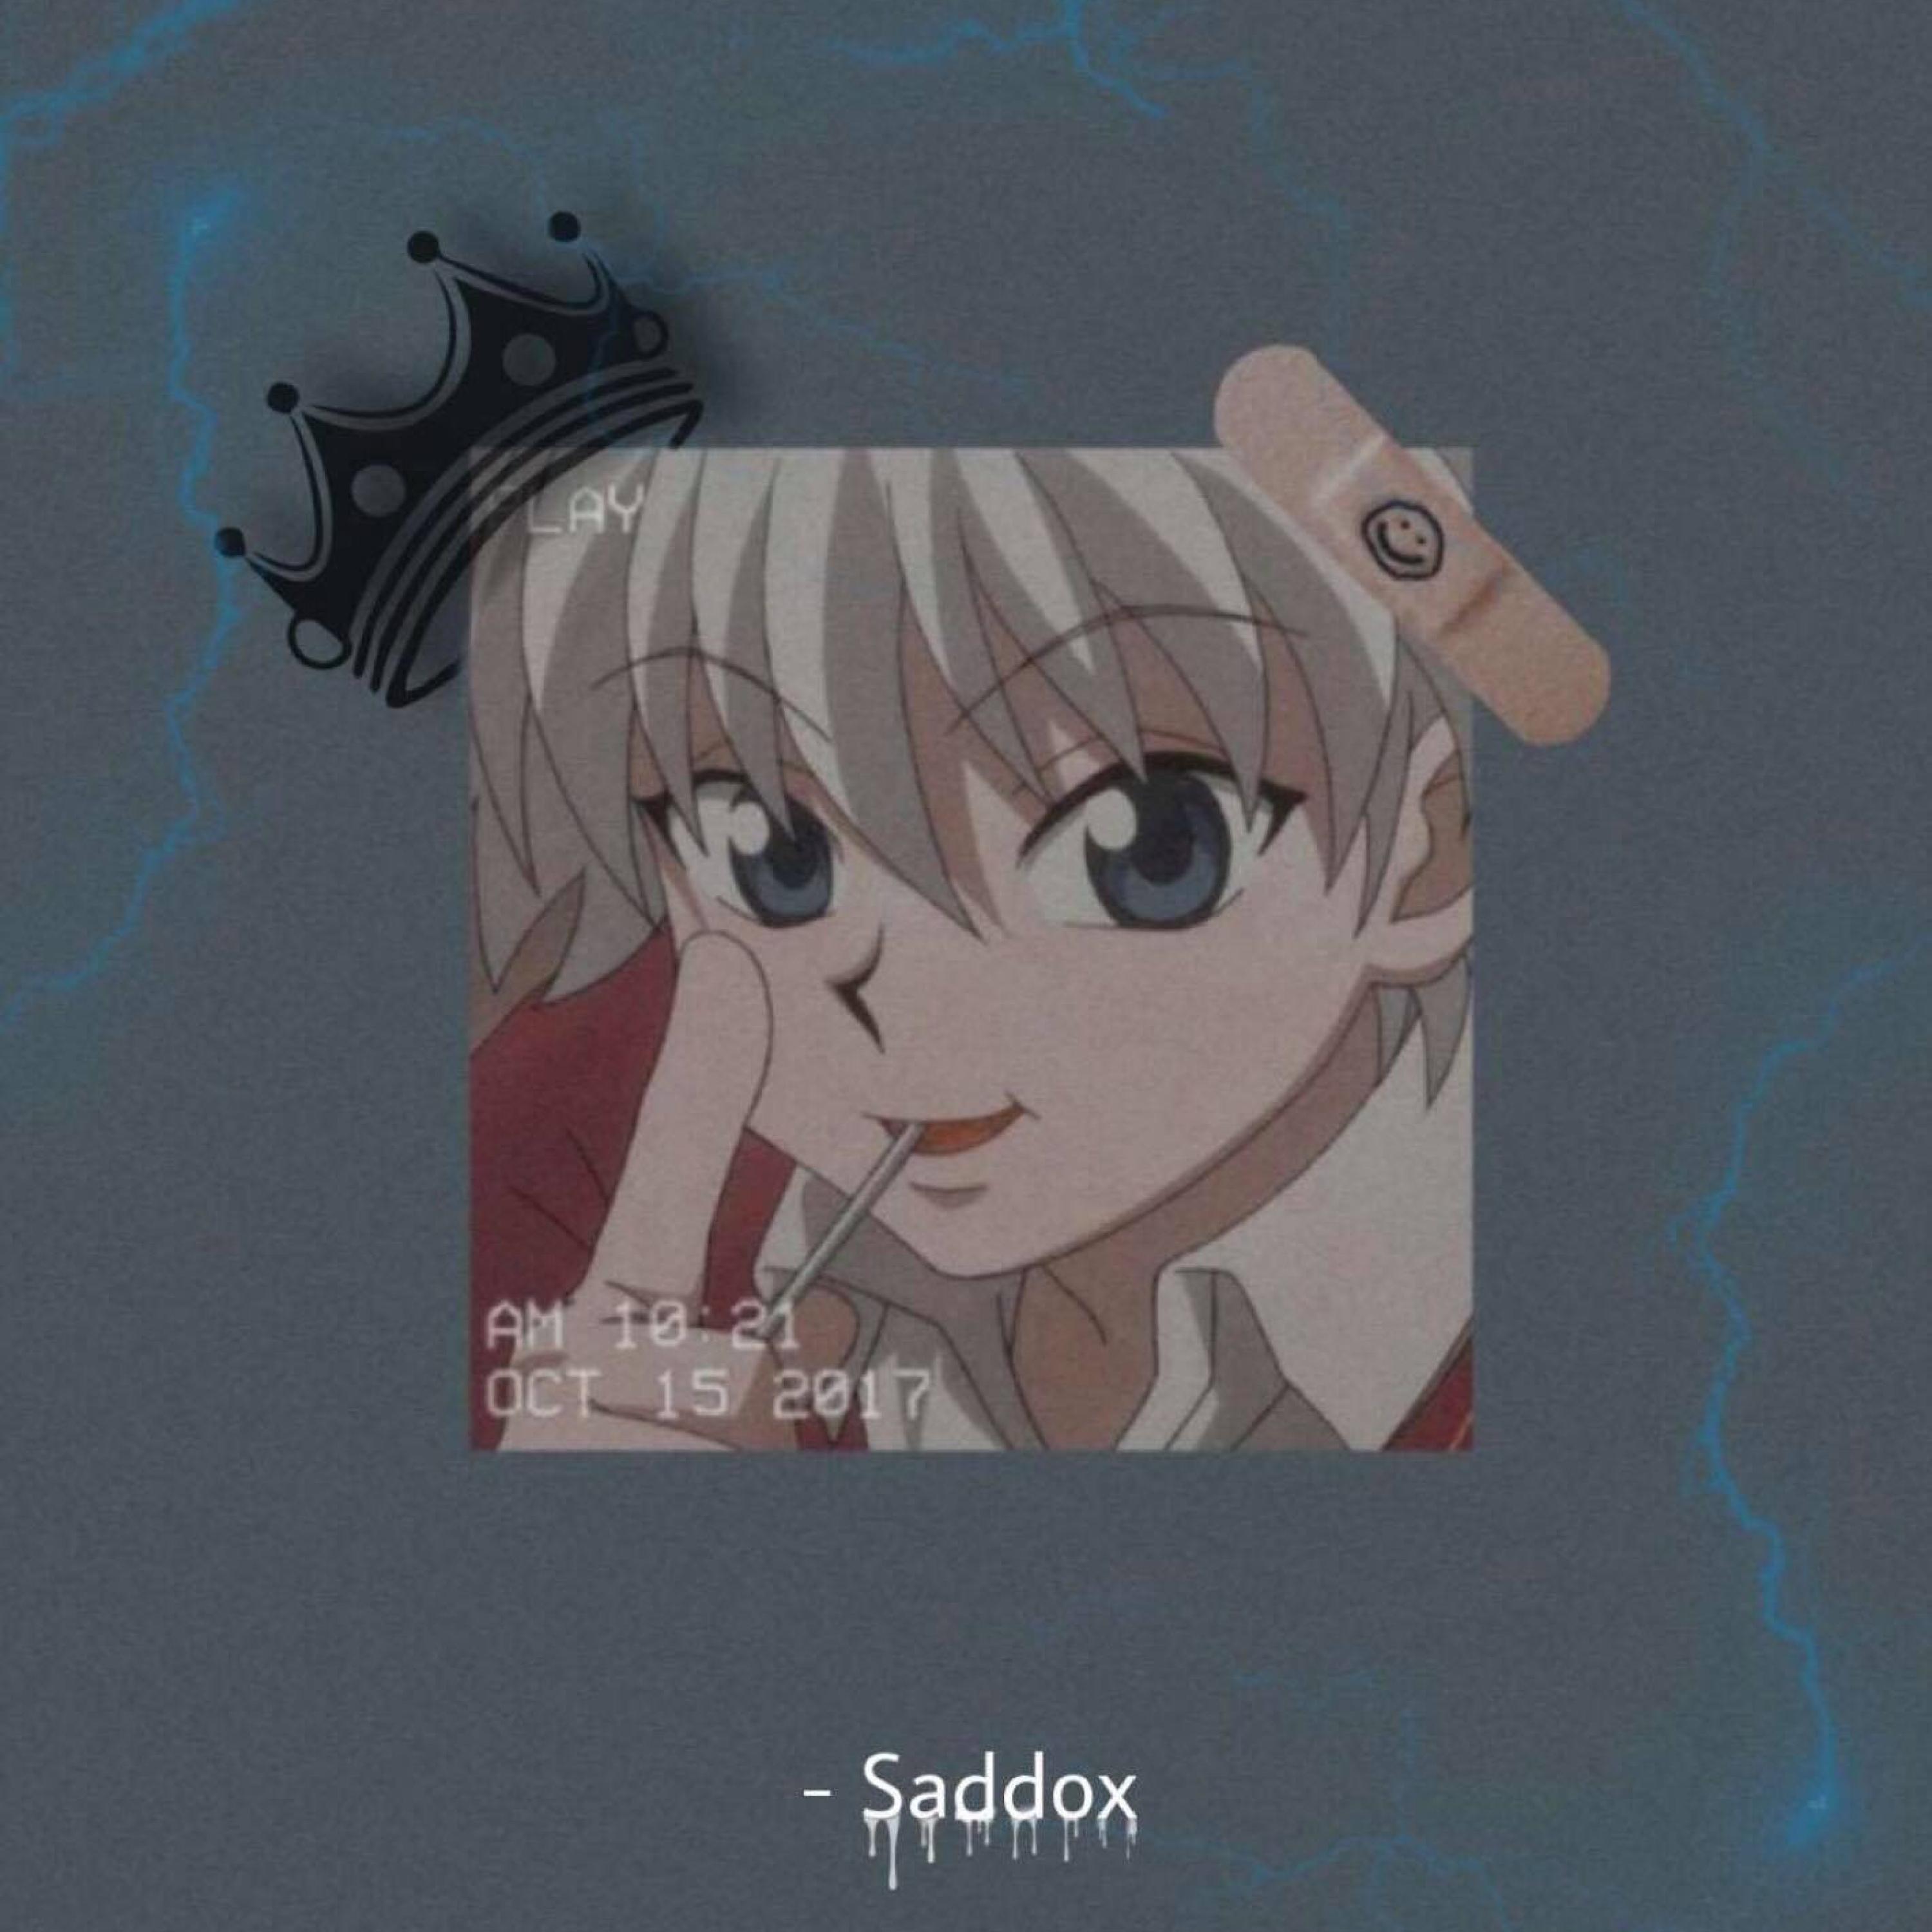 Saddox - Could've been